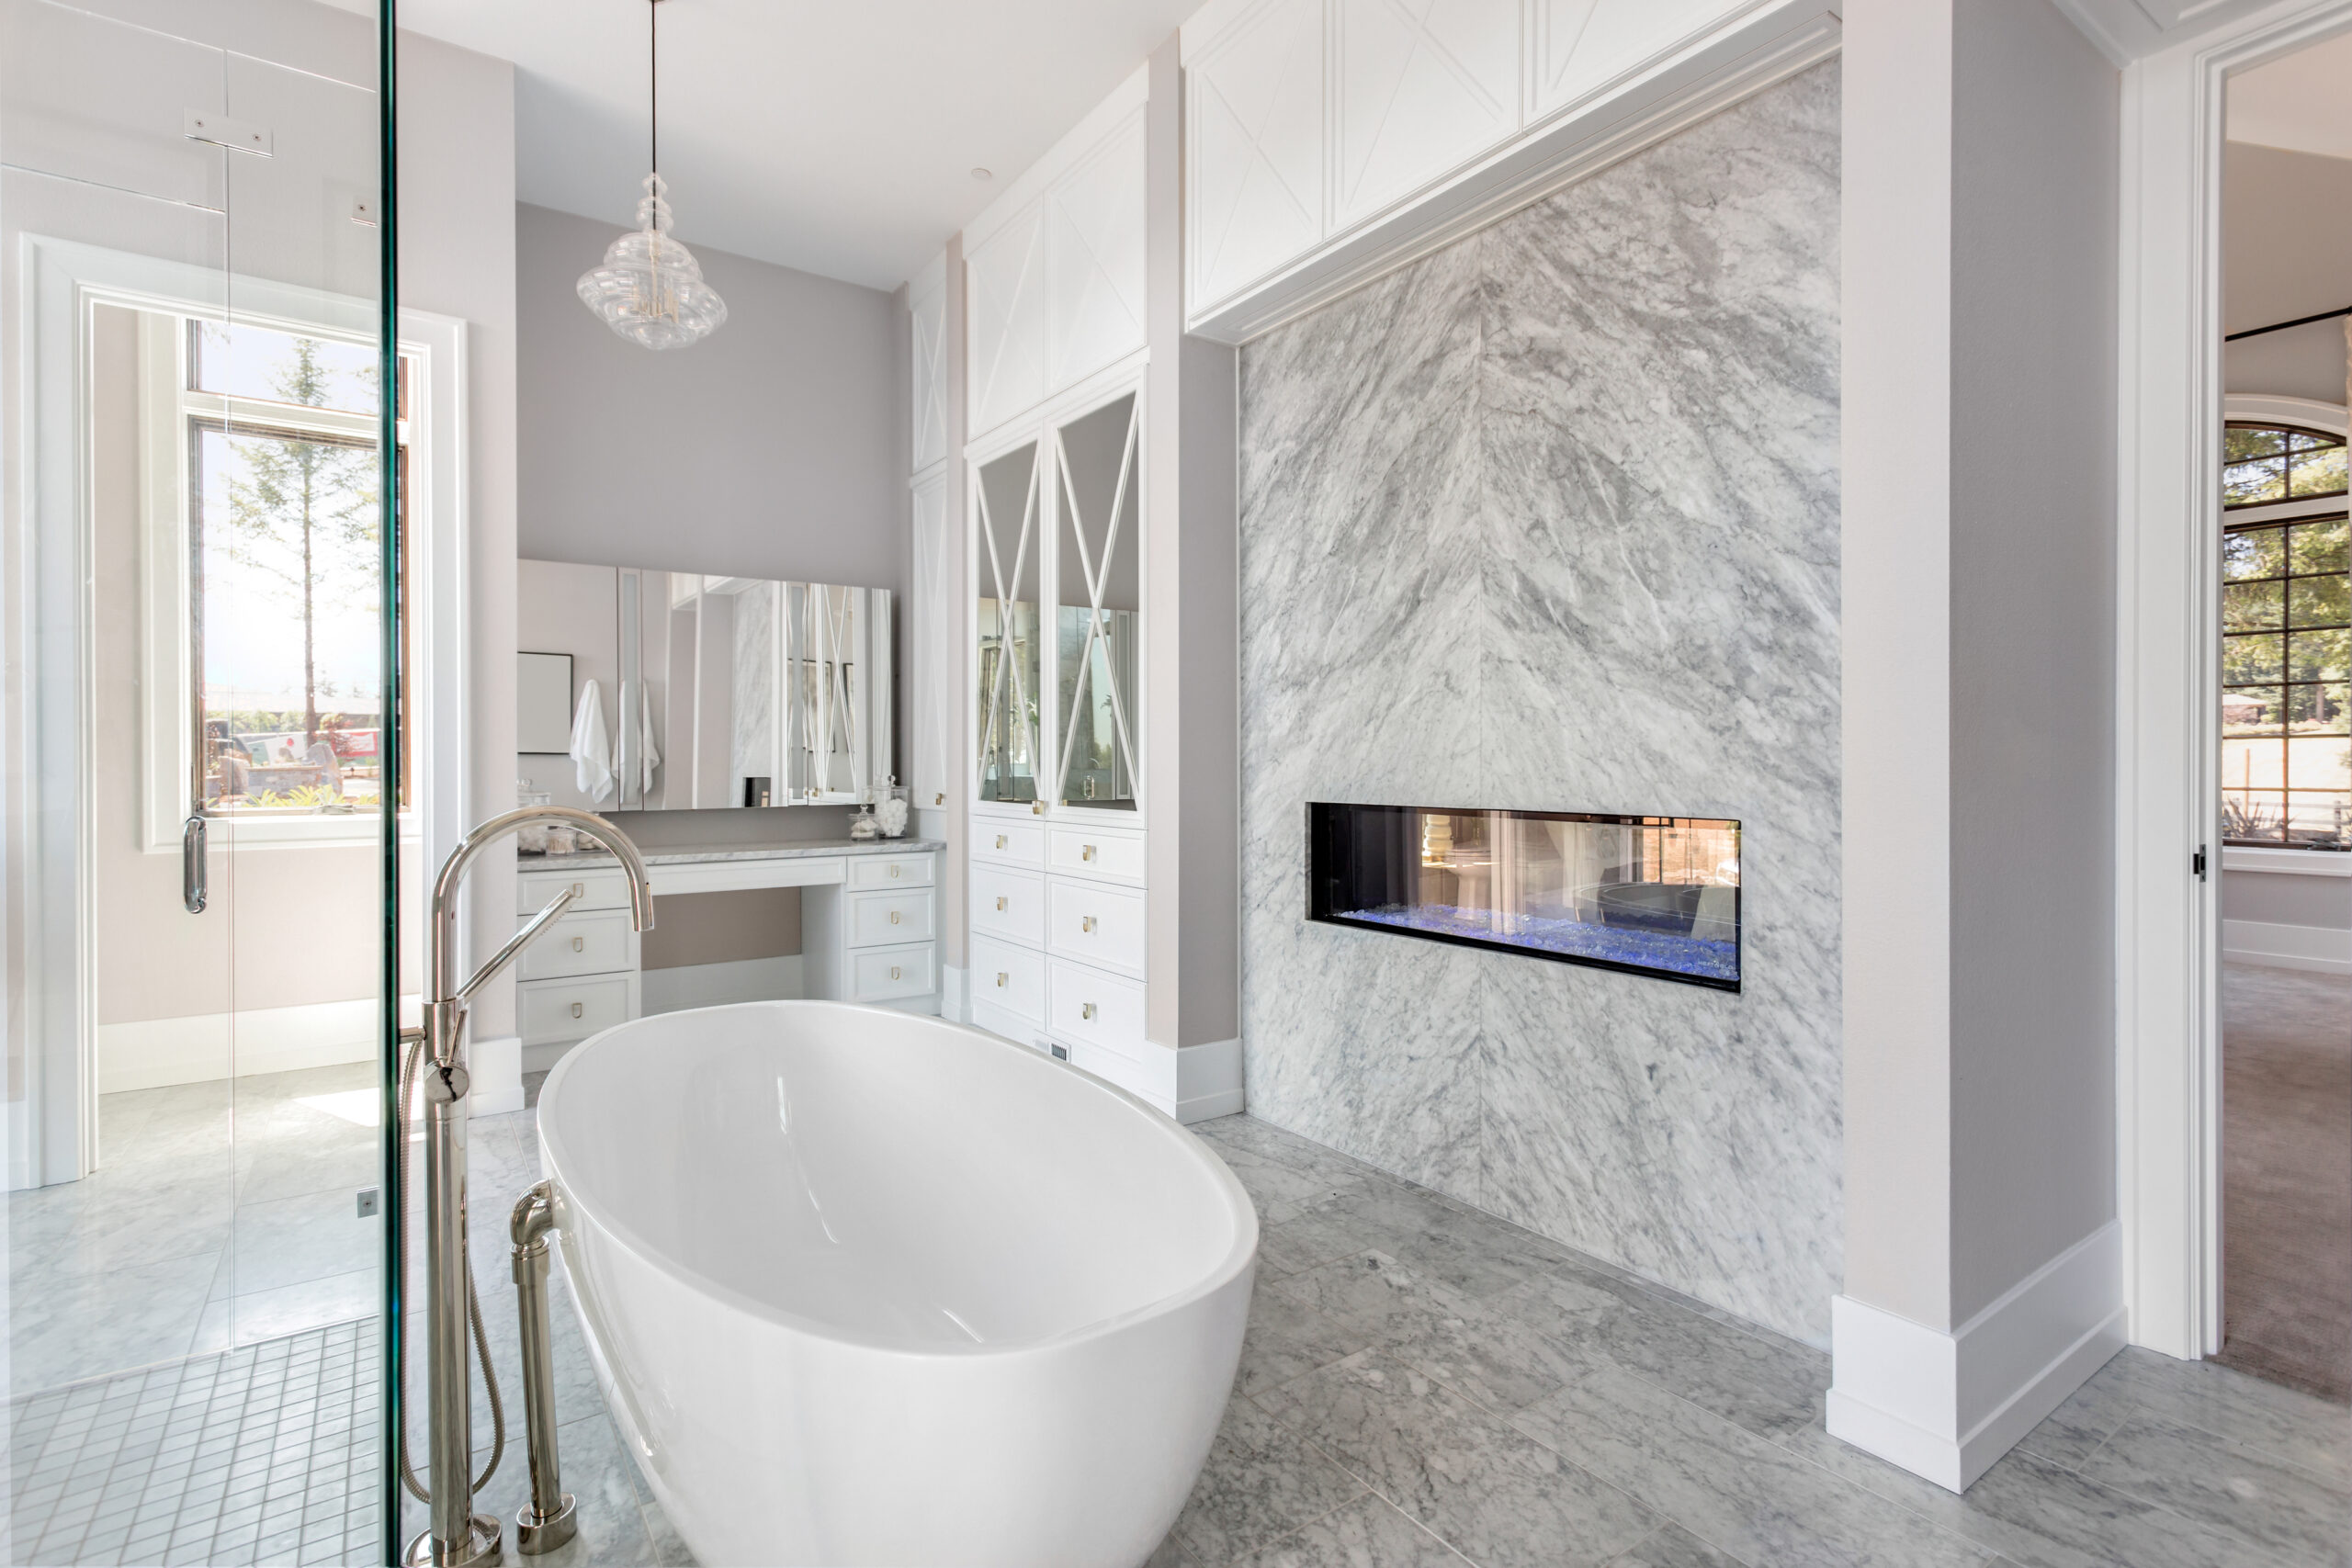 https://www.forbesglobalproperties.com/wp-content/uploads/2022/05/luxury_bathroom_with_fireplace-scaled.jpg